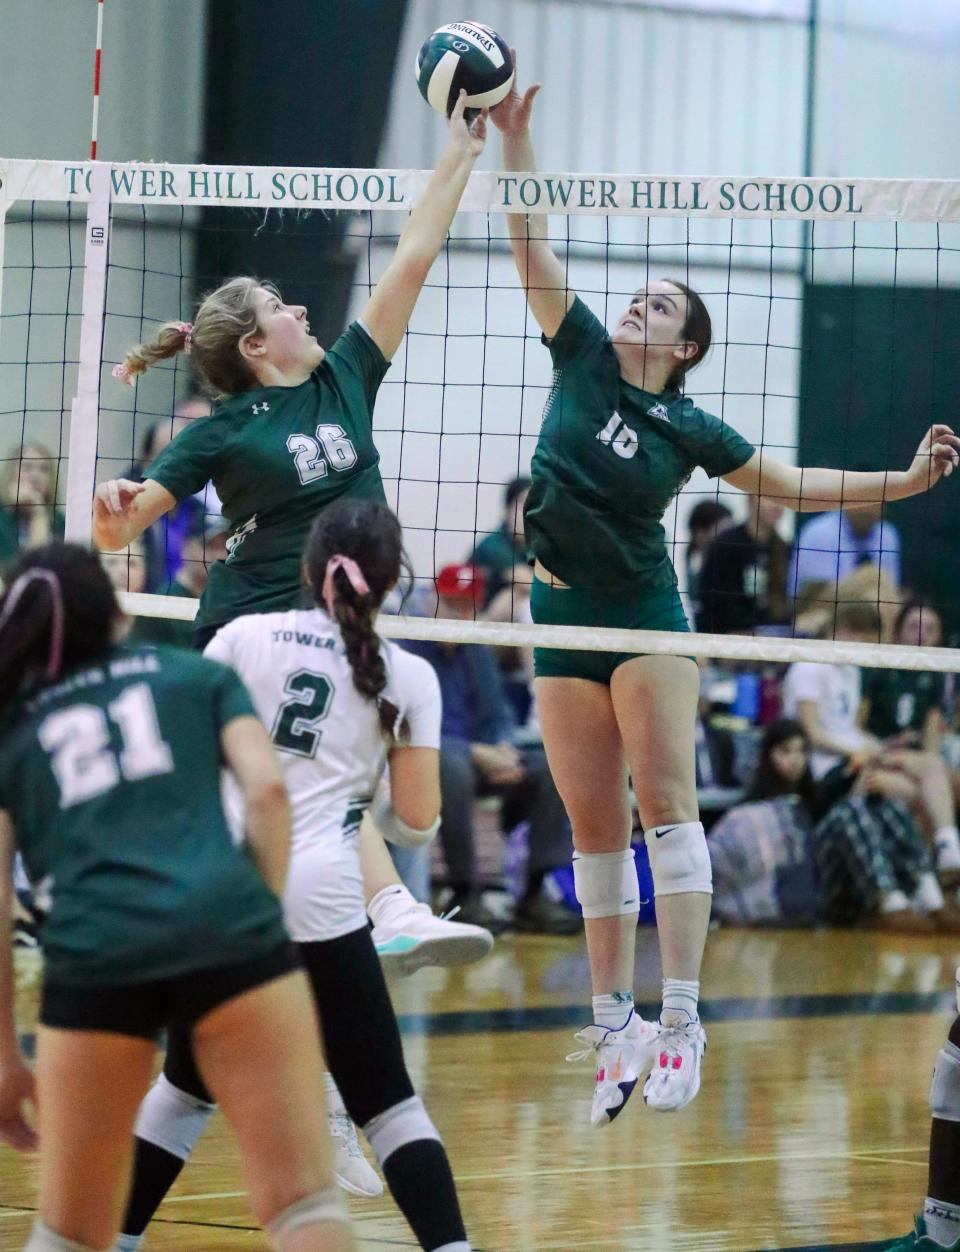 Archmere's Claire McGonigle (18) and Tower Hill's Lydia Spencer (26) come together at the net in the first set of Tower Hill's 3-1 win, Tuesday, Oct. 24, 2023 at Tower Hill School.